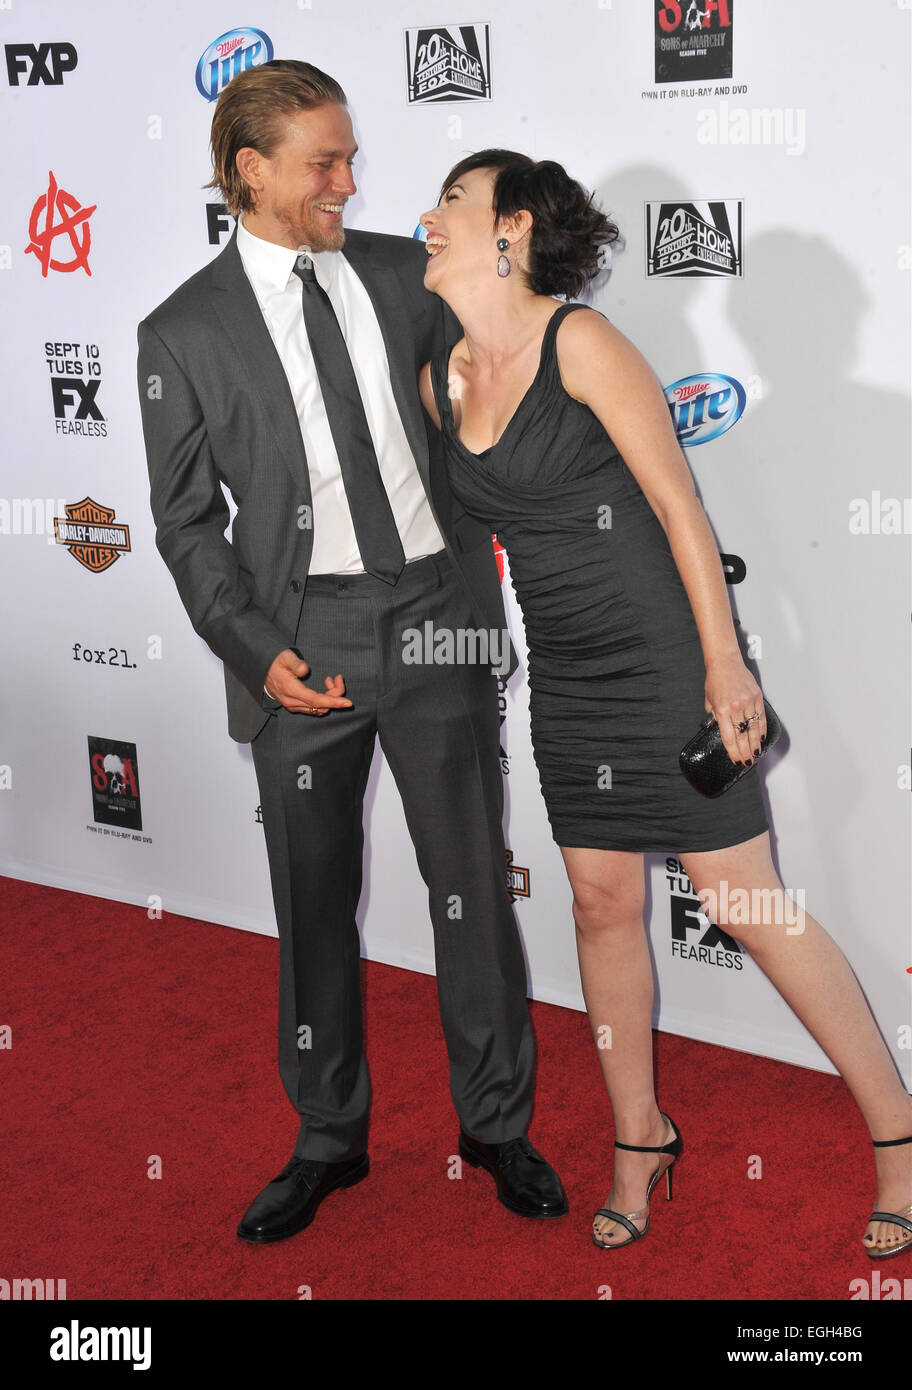 LOS ANGELES, CA - SEPTEMBER 7, 2013: Charlie Hunnam & Maggie Siff at the season 6 premiere of 'Sons of Anarchy' at the Dolby Theatre, Hollywood. Stock Photo